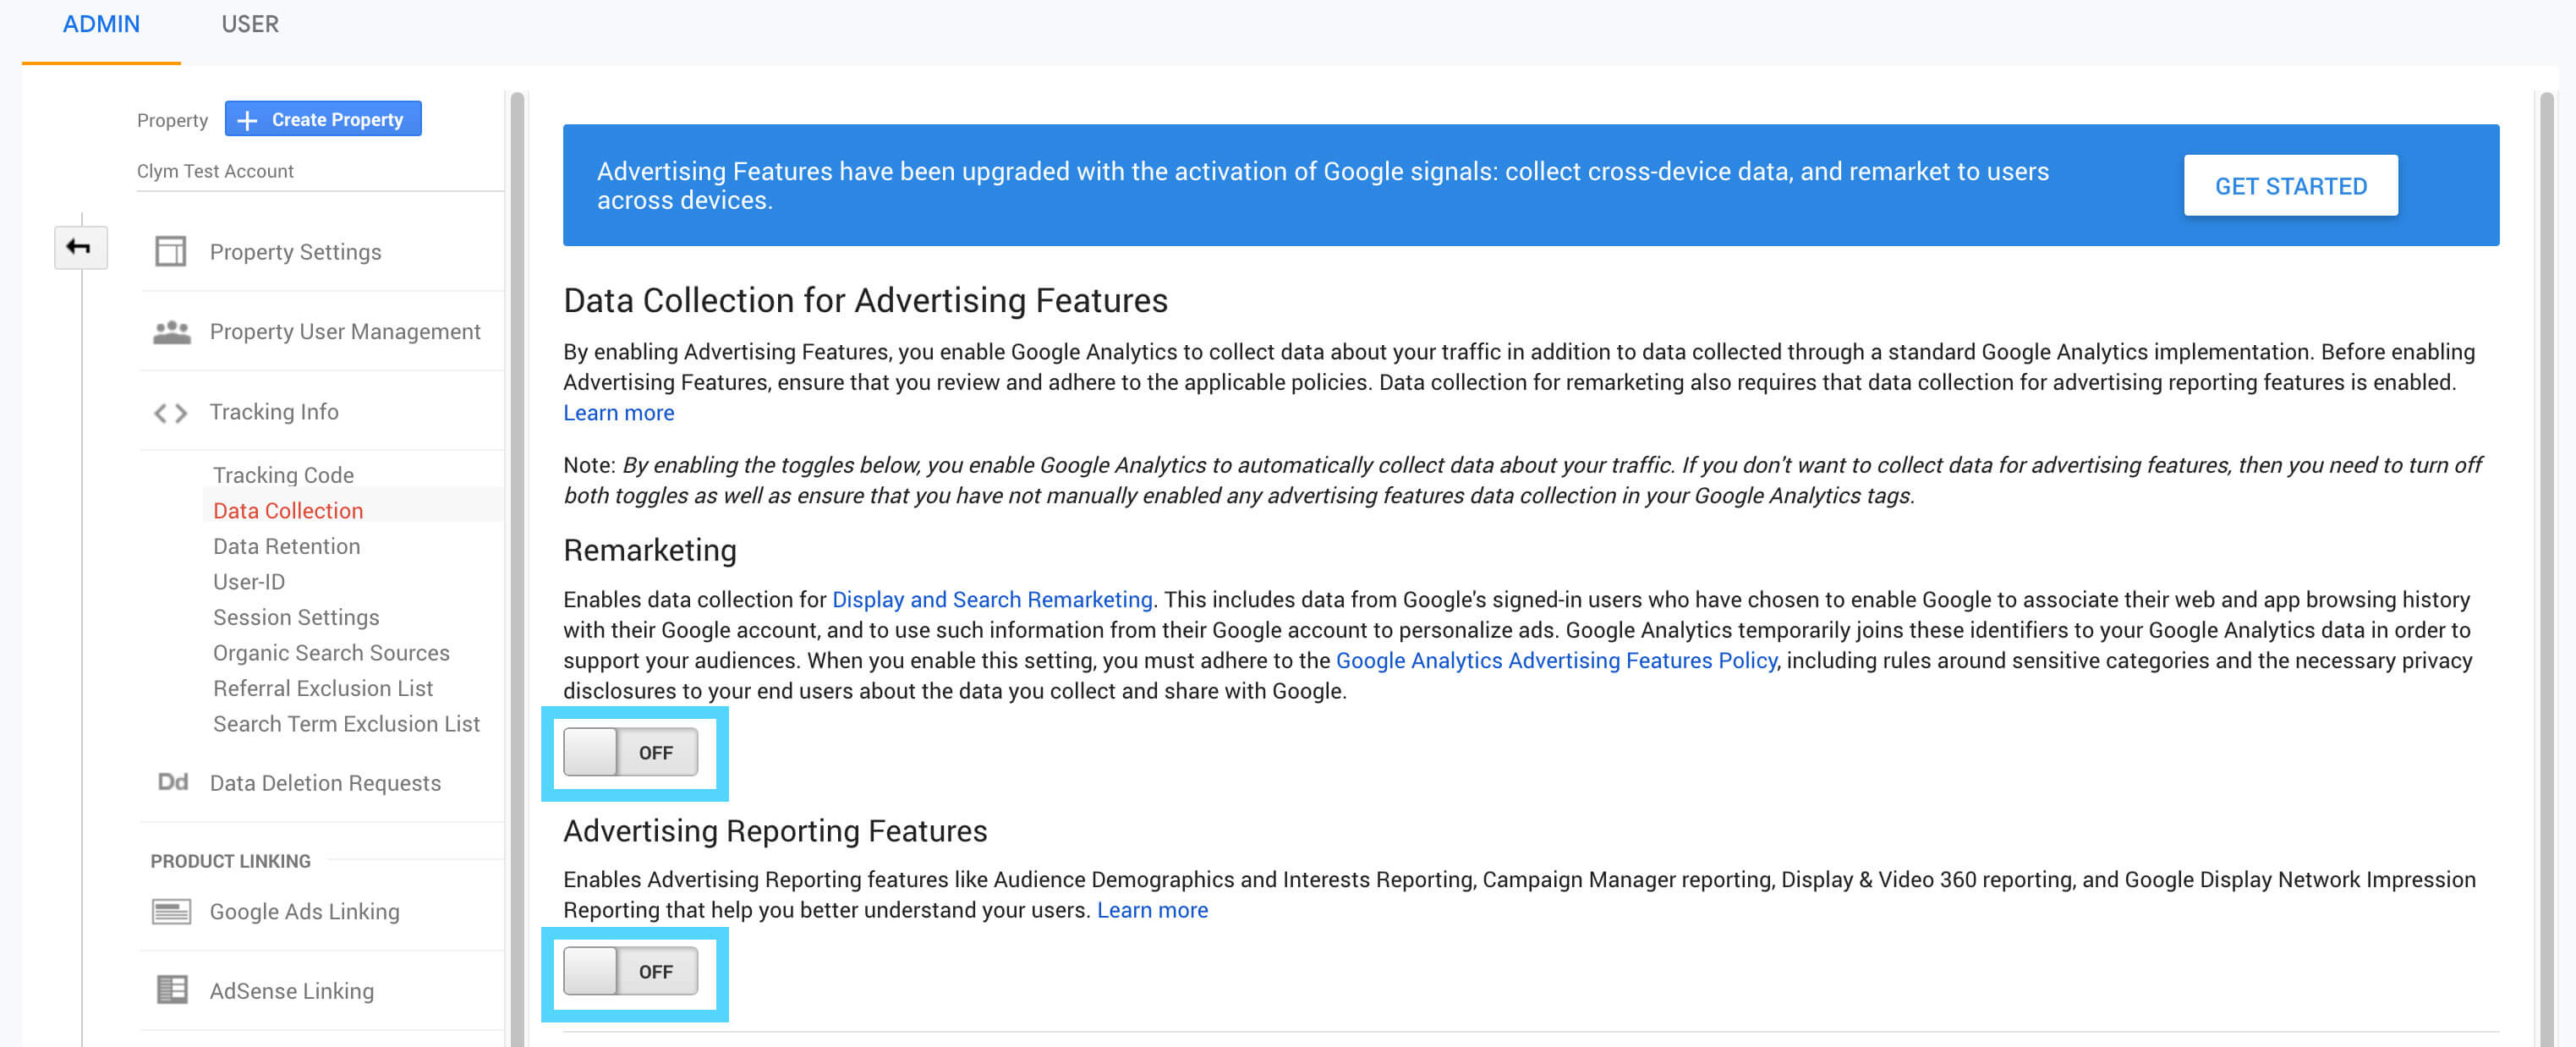 How to disable Data Collection for Advertising purposes in Google Analytics for GDPR and CCPA?